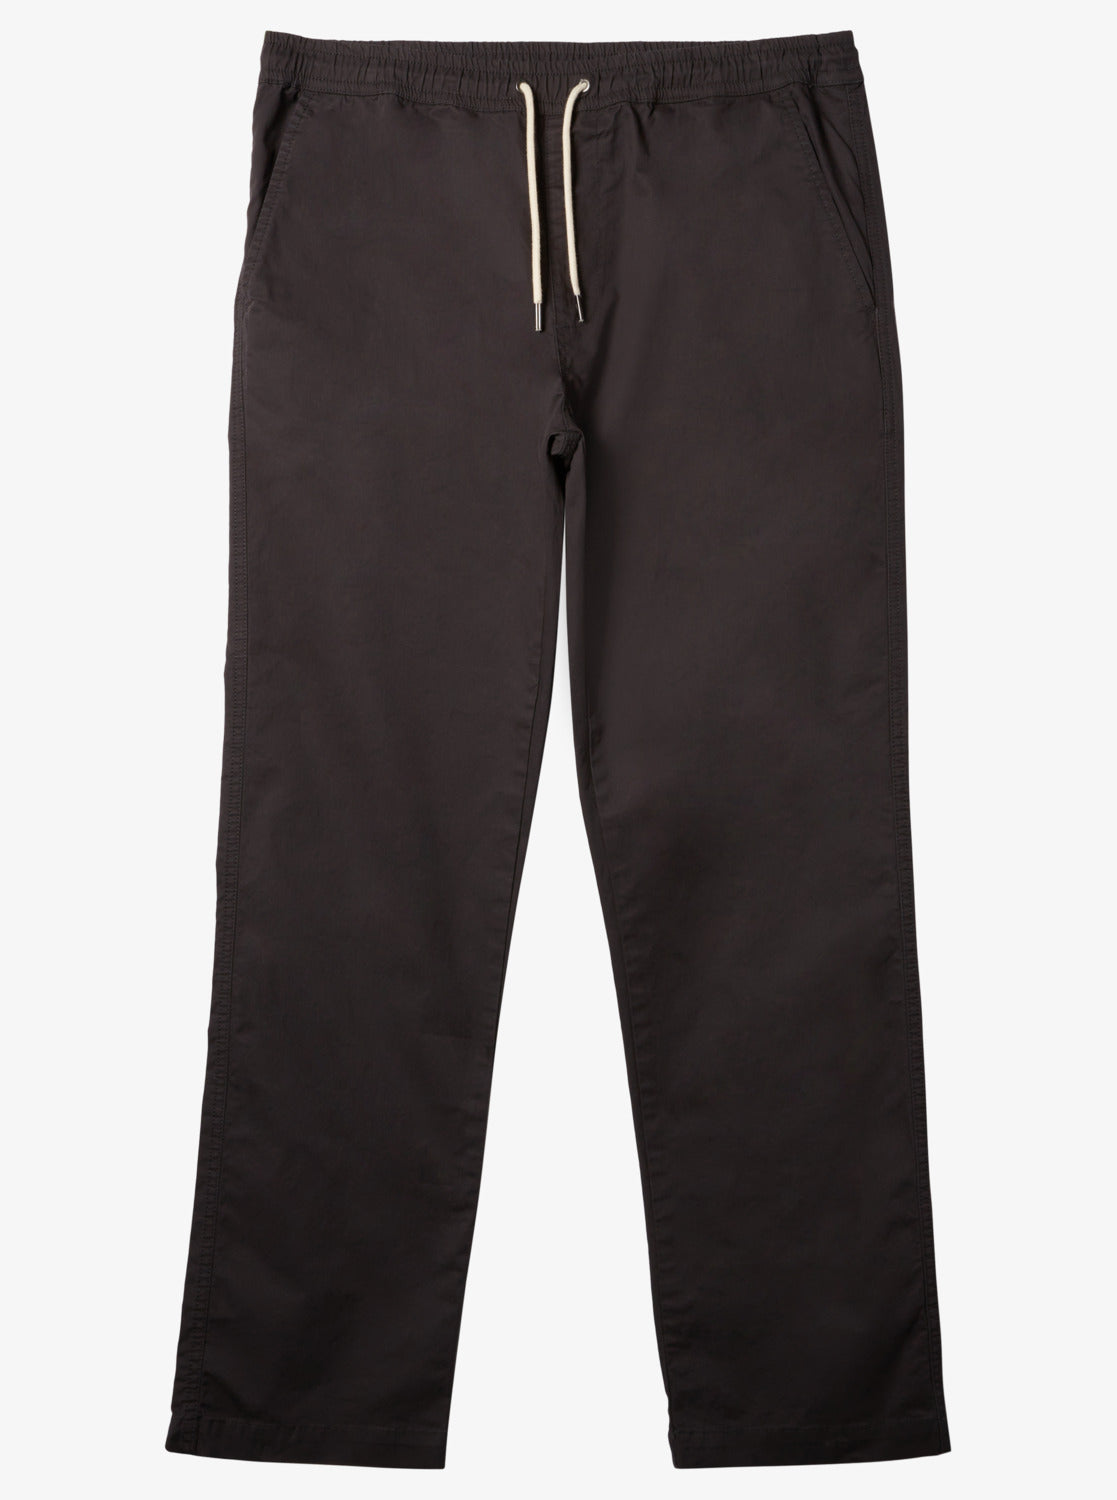 Quiksilver DNA Beach Pants in tarmac colourway  from front